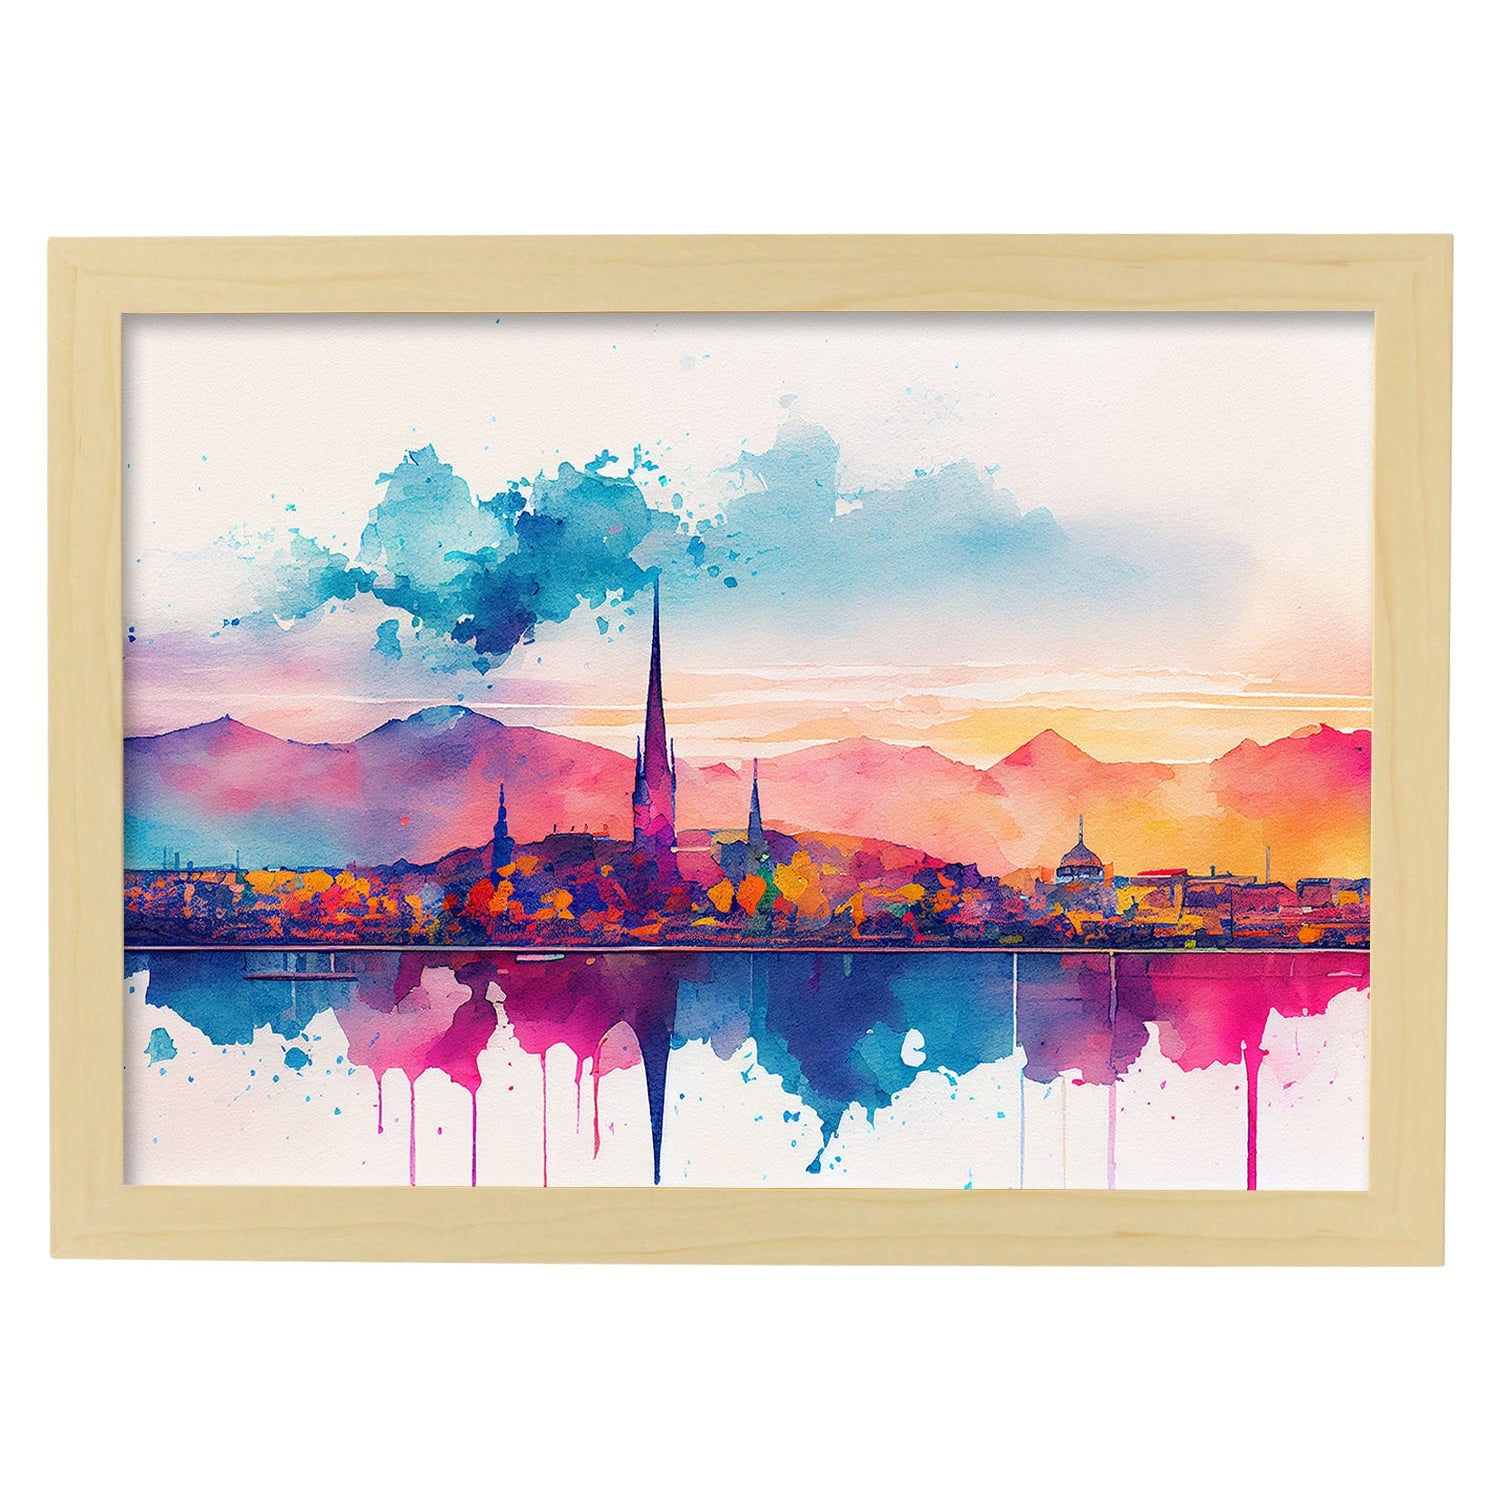 Nacnic watercolor of a skyline of the city of Geneva_1. Aesthetic Wall Art Prints for Bedroom or Living Room Design.-Artwork-Nacnic-A4-Marco Madera Clara-Nacnic Estudio SL